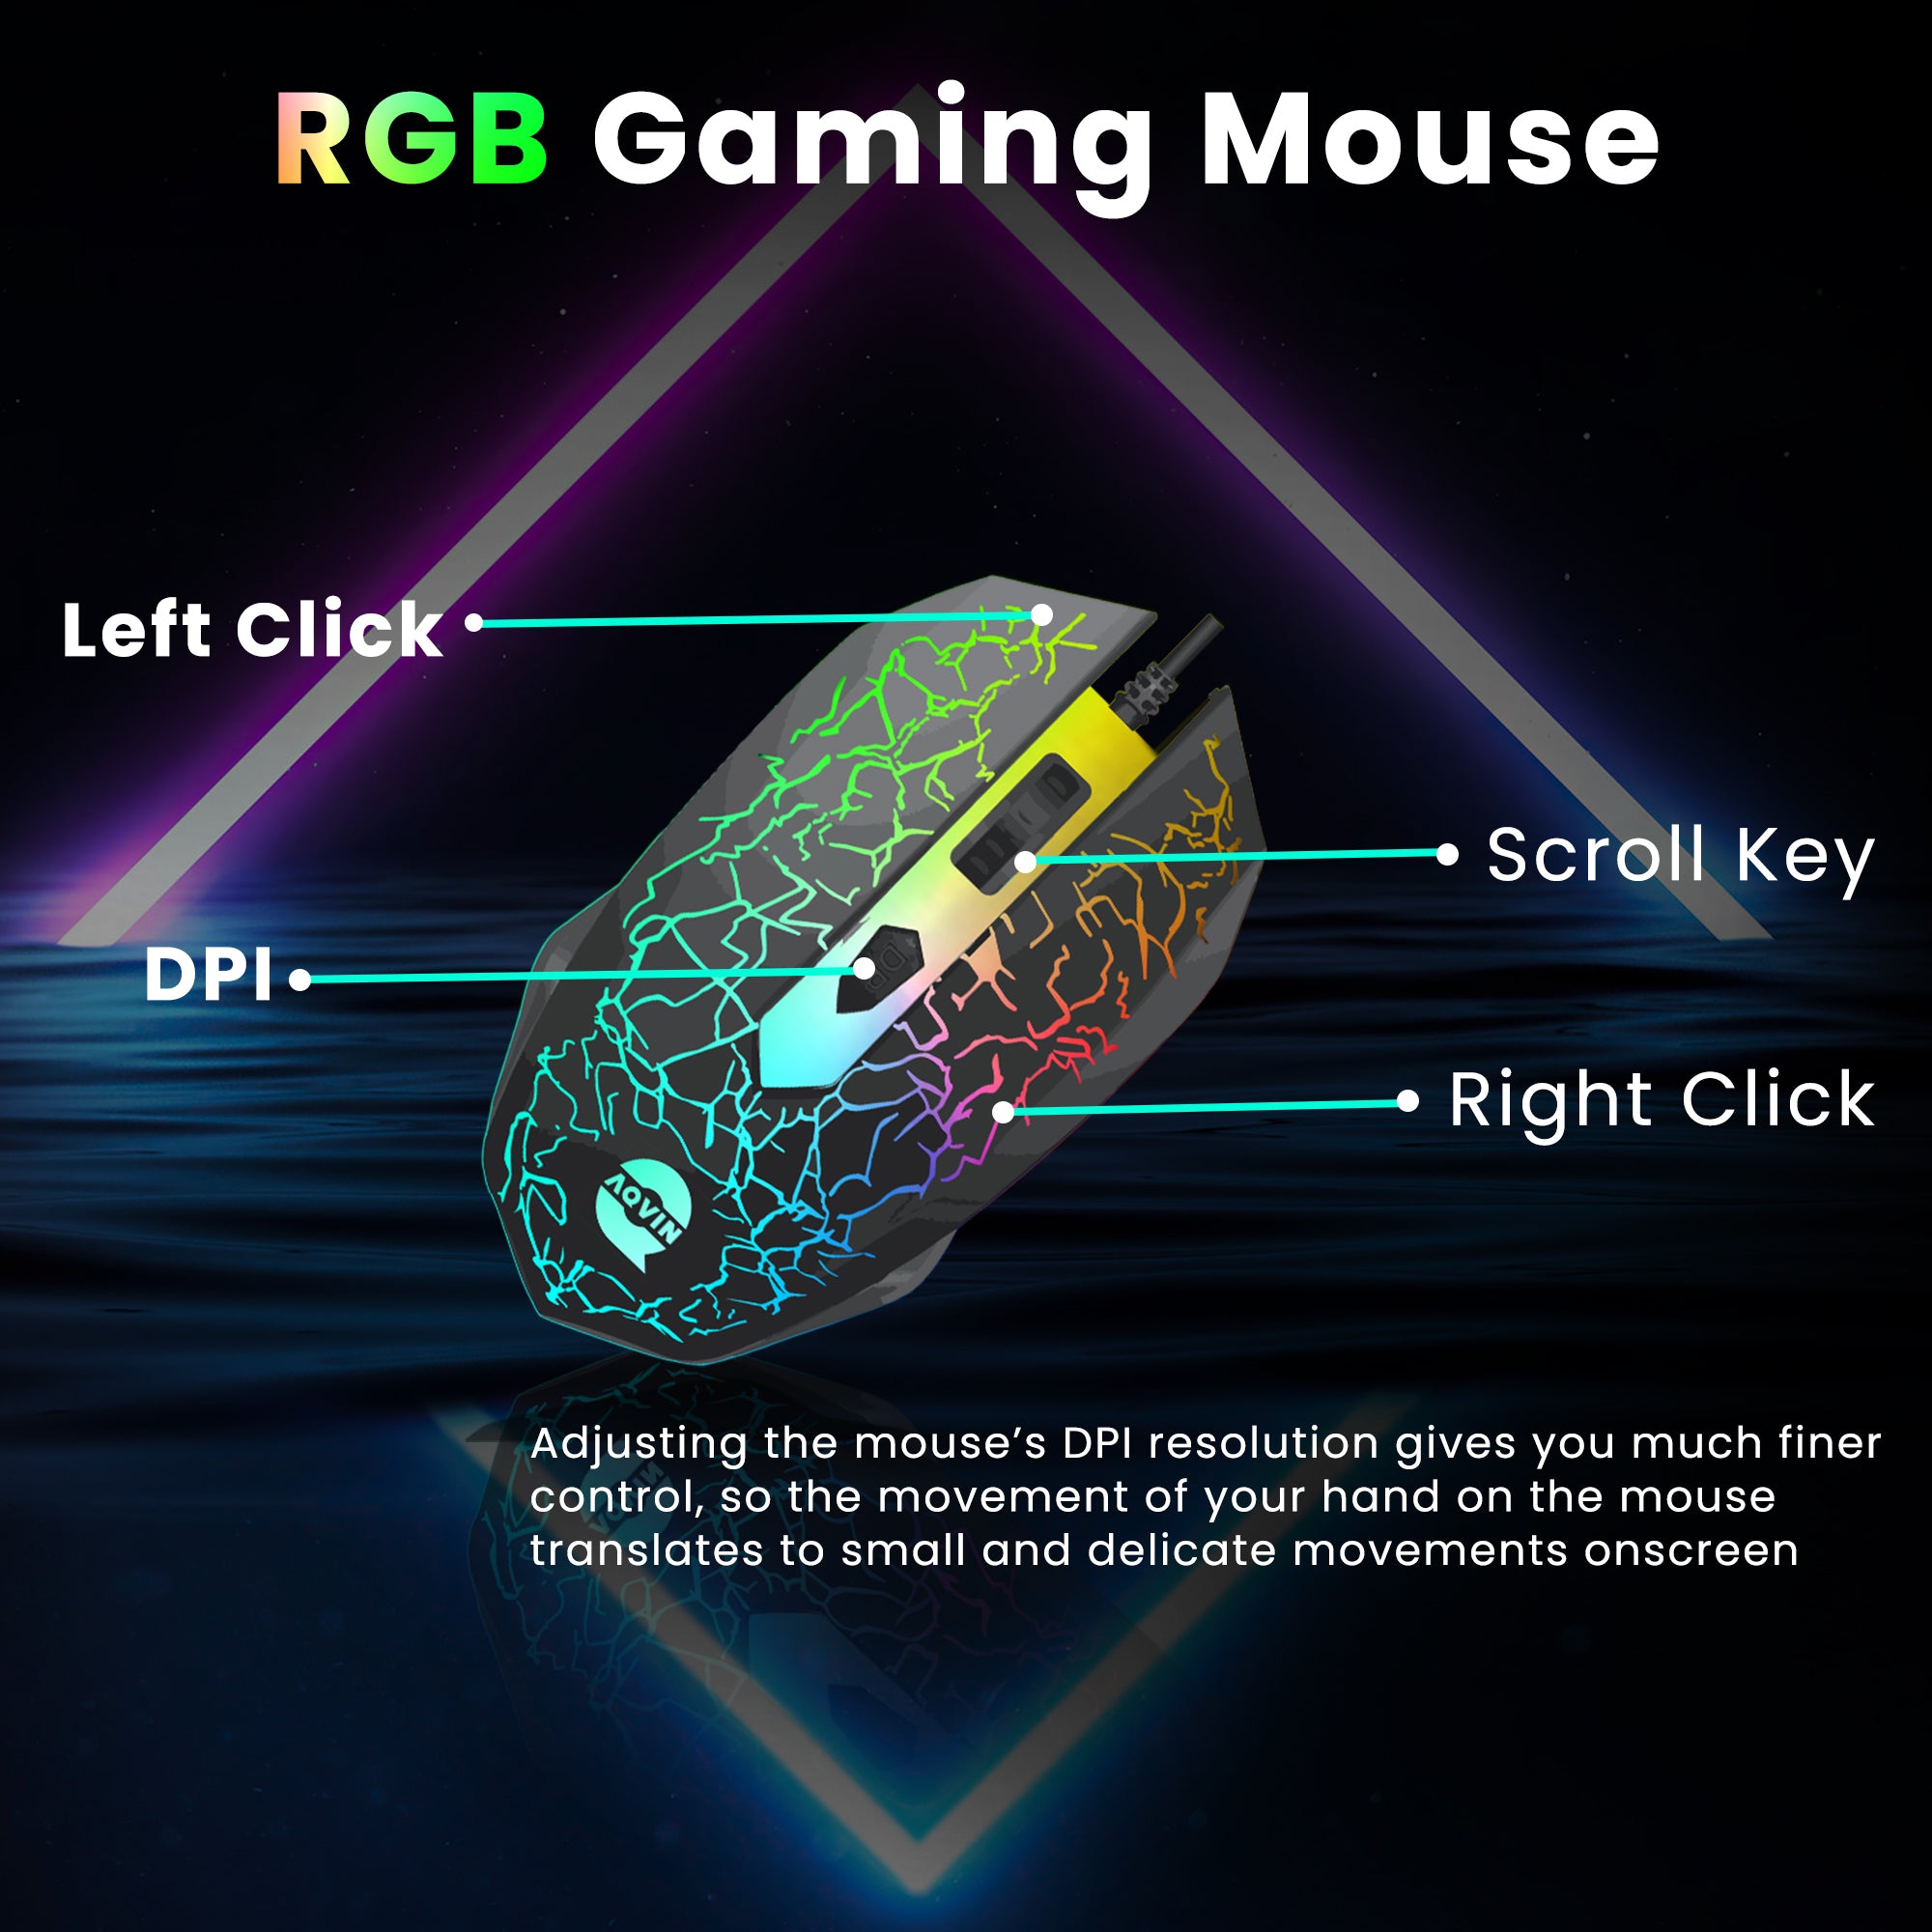 AQVIN QC20-G | RGB Gaming Keyboard and Mouse Combo with Pad for Gamers ~ Multimedia and Anti-Ghosting capability keys ~ ERGONOMIC design - upto 3200 DPI (Rainbow LED Light Effect)